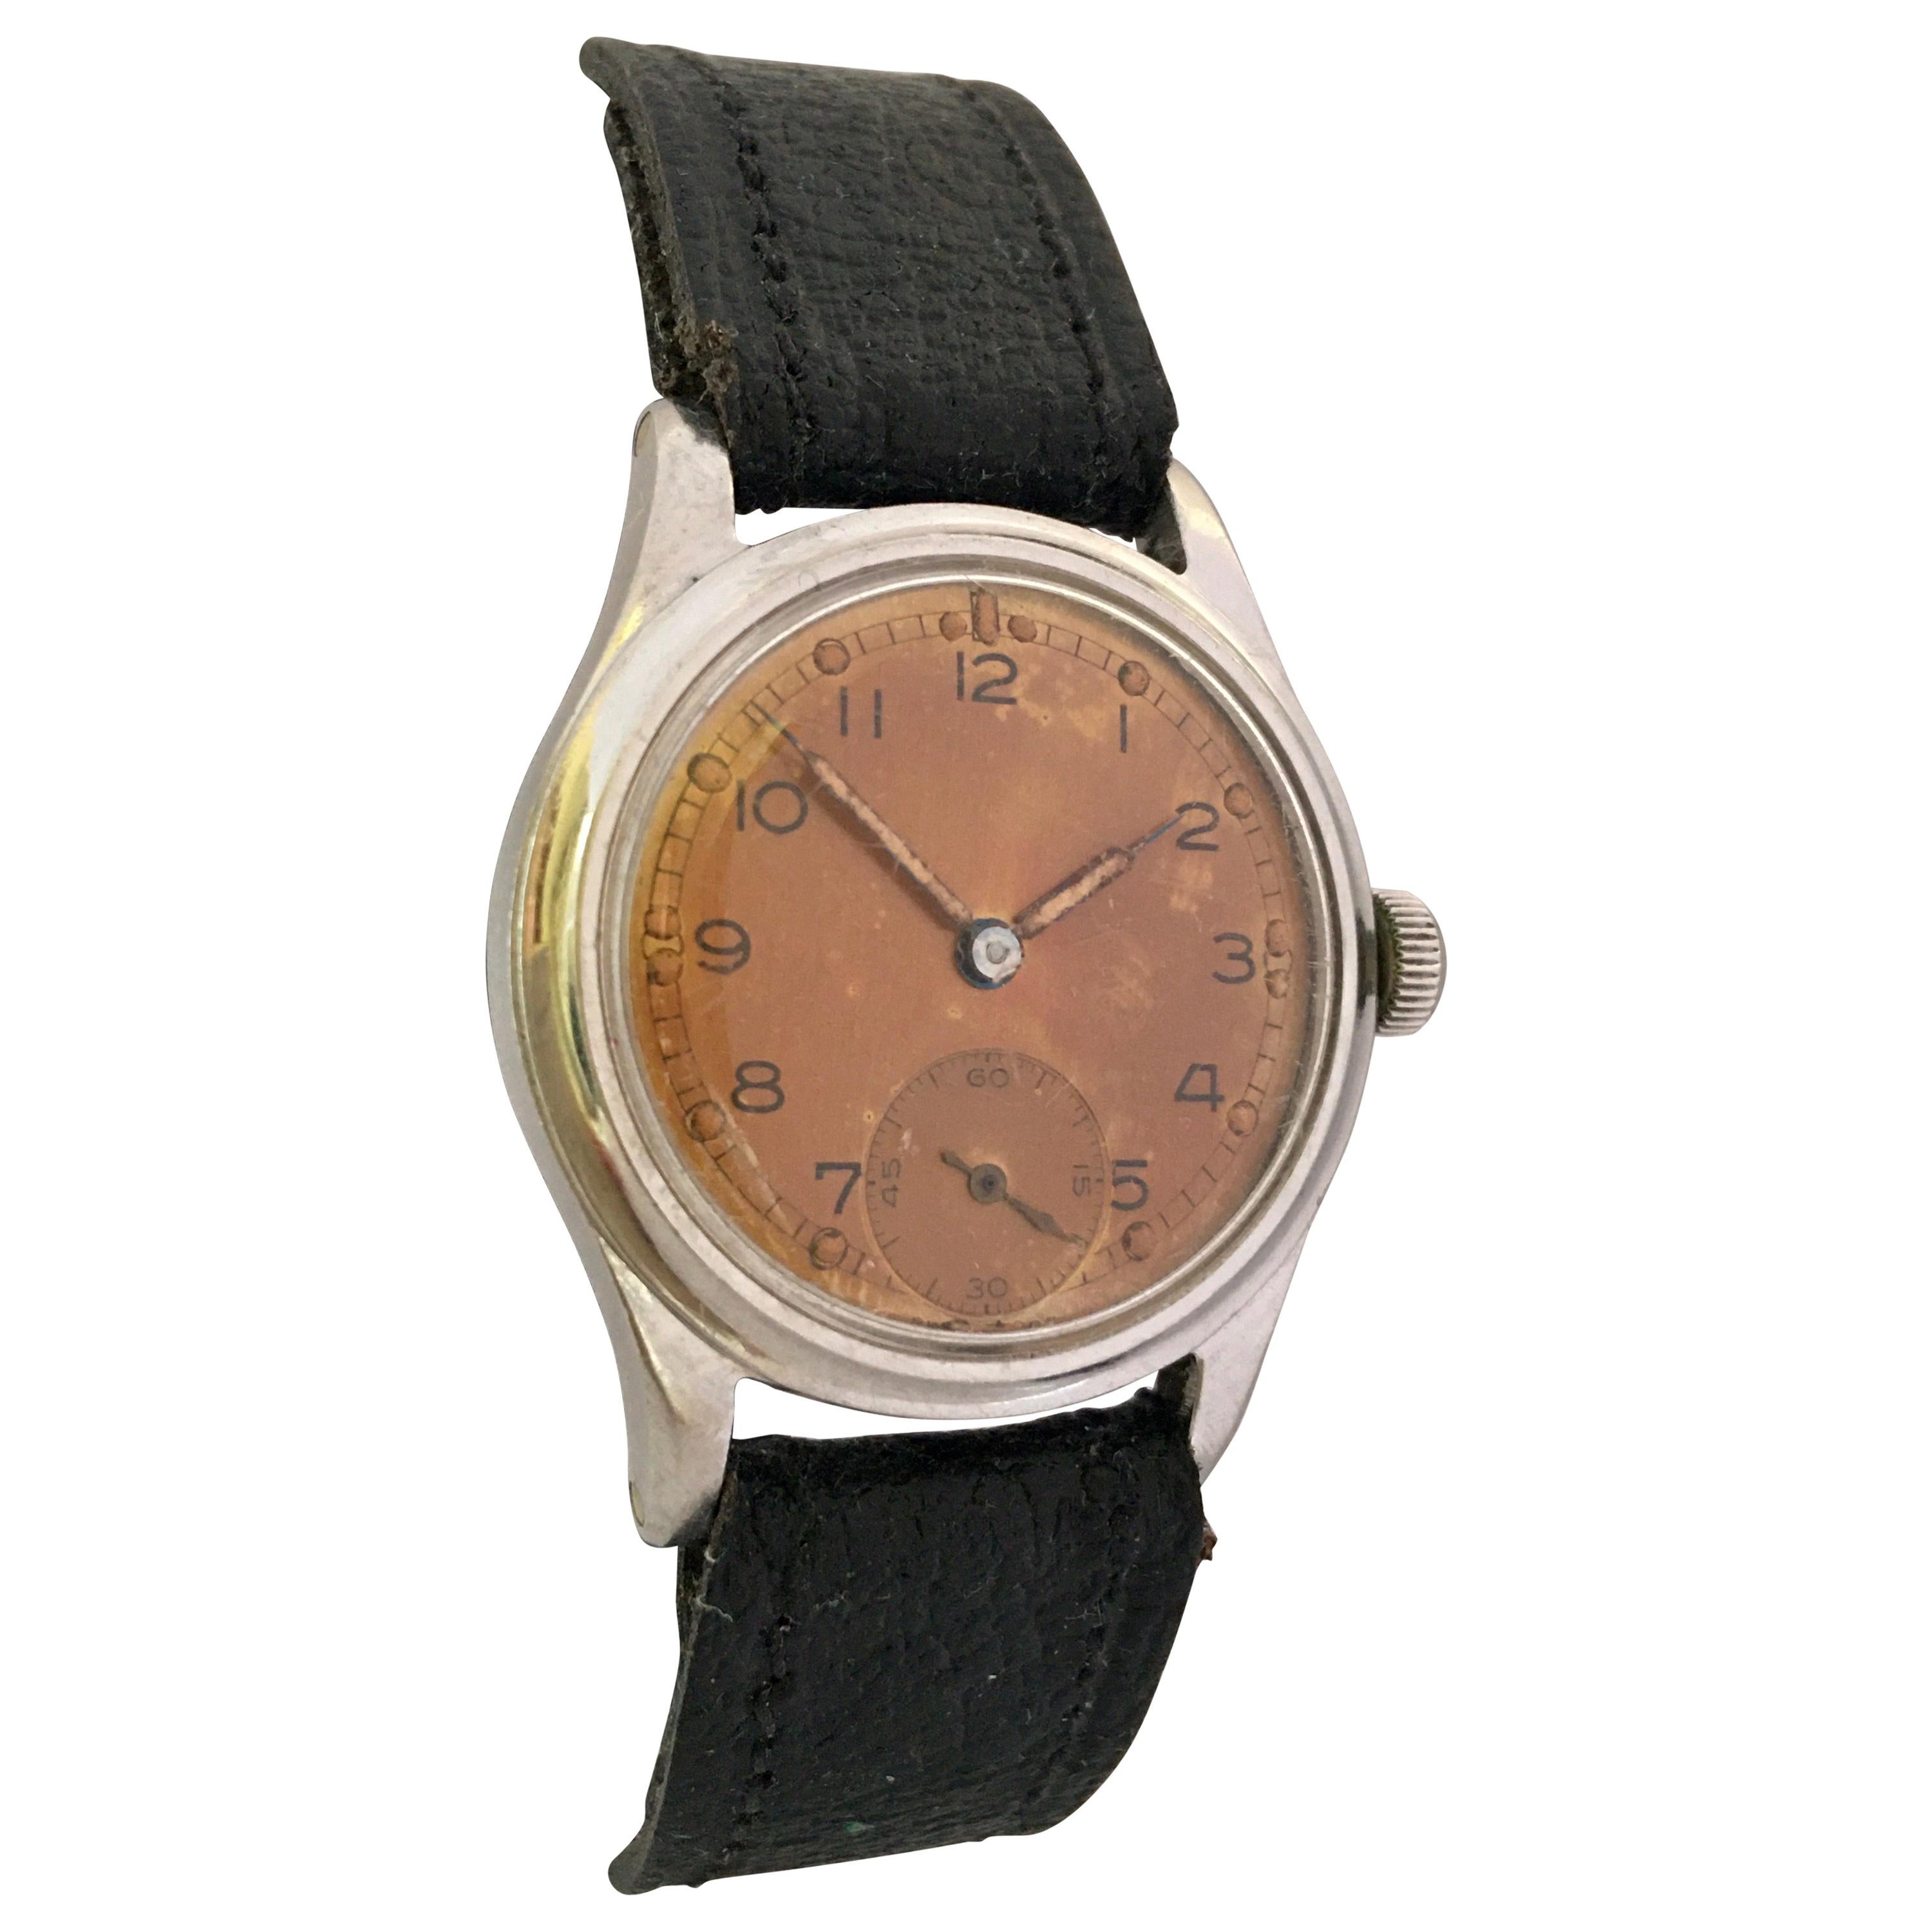 Vintage 1950s Stainless Steel Swiss Mechanical Military Watch